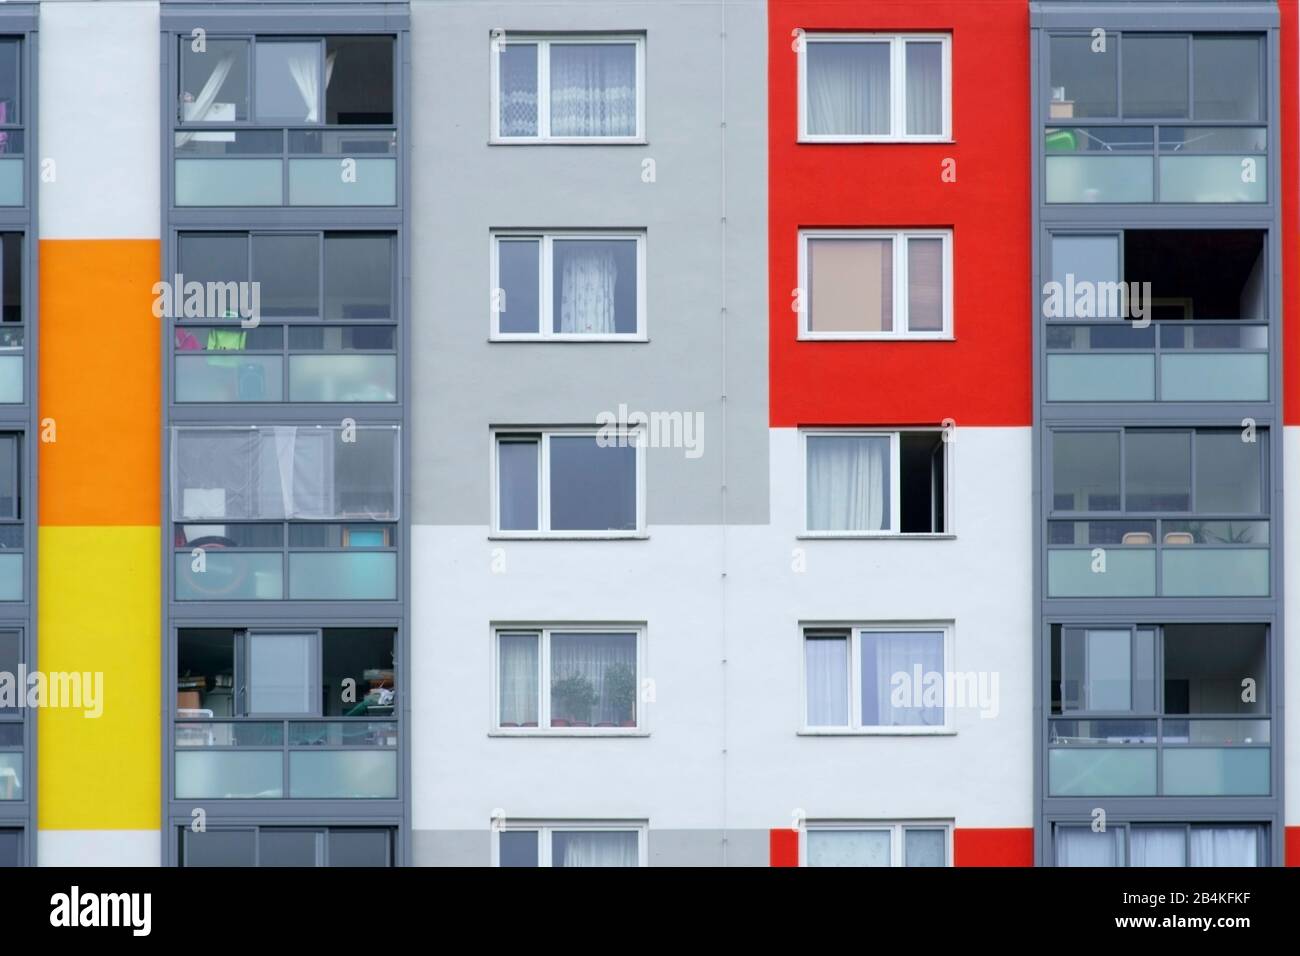 Household items are behind the windows of a multi-storey residential building. Stock Photo